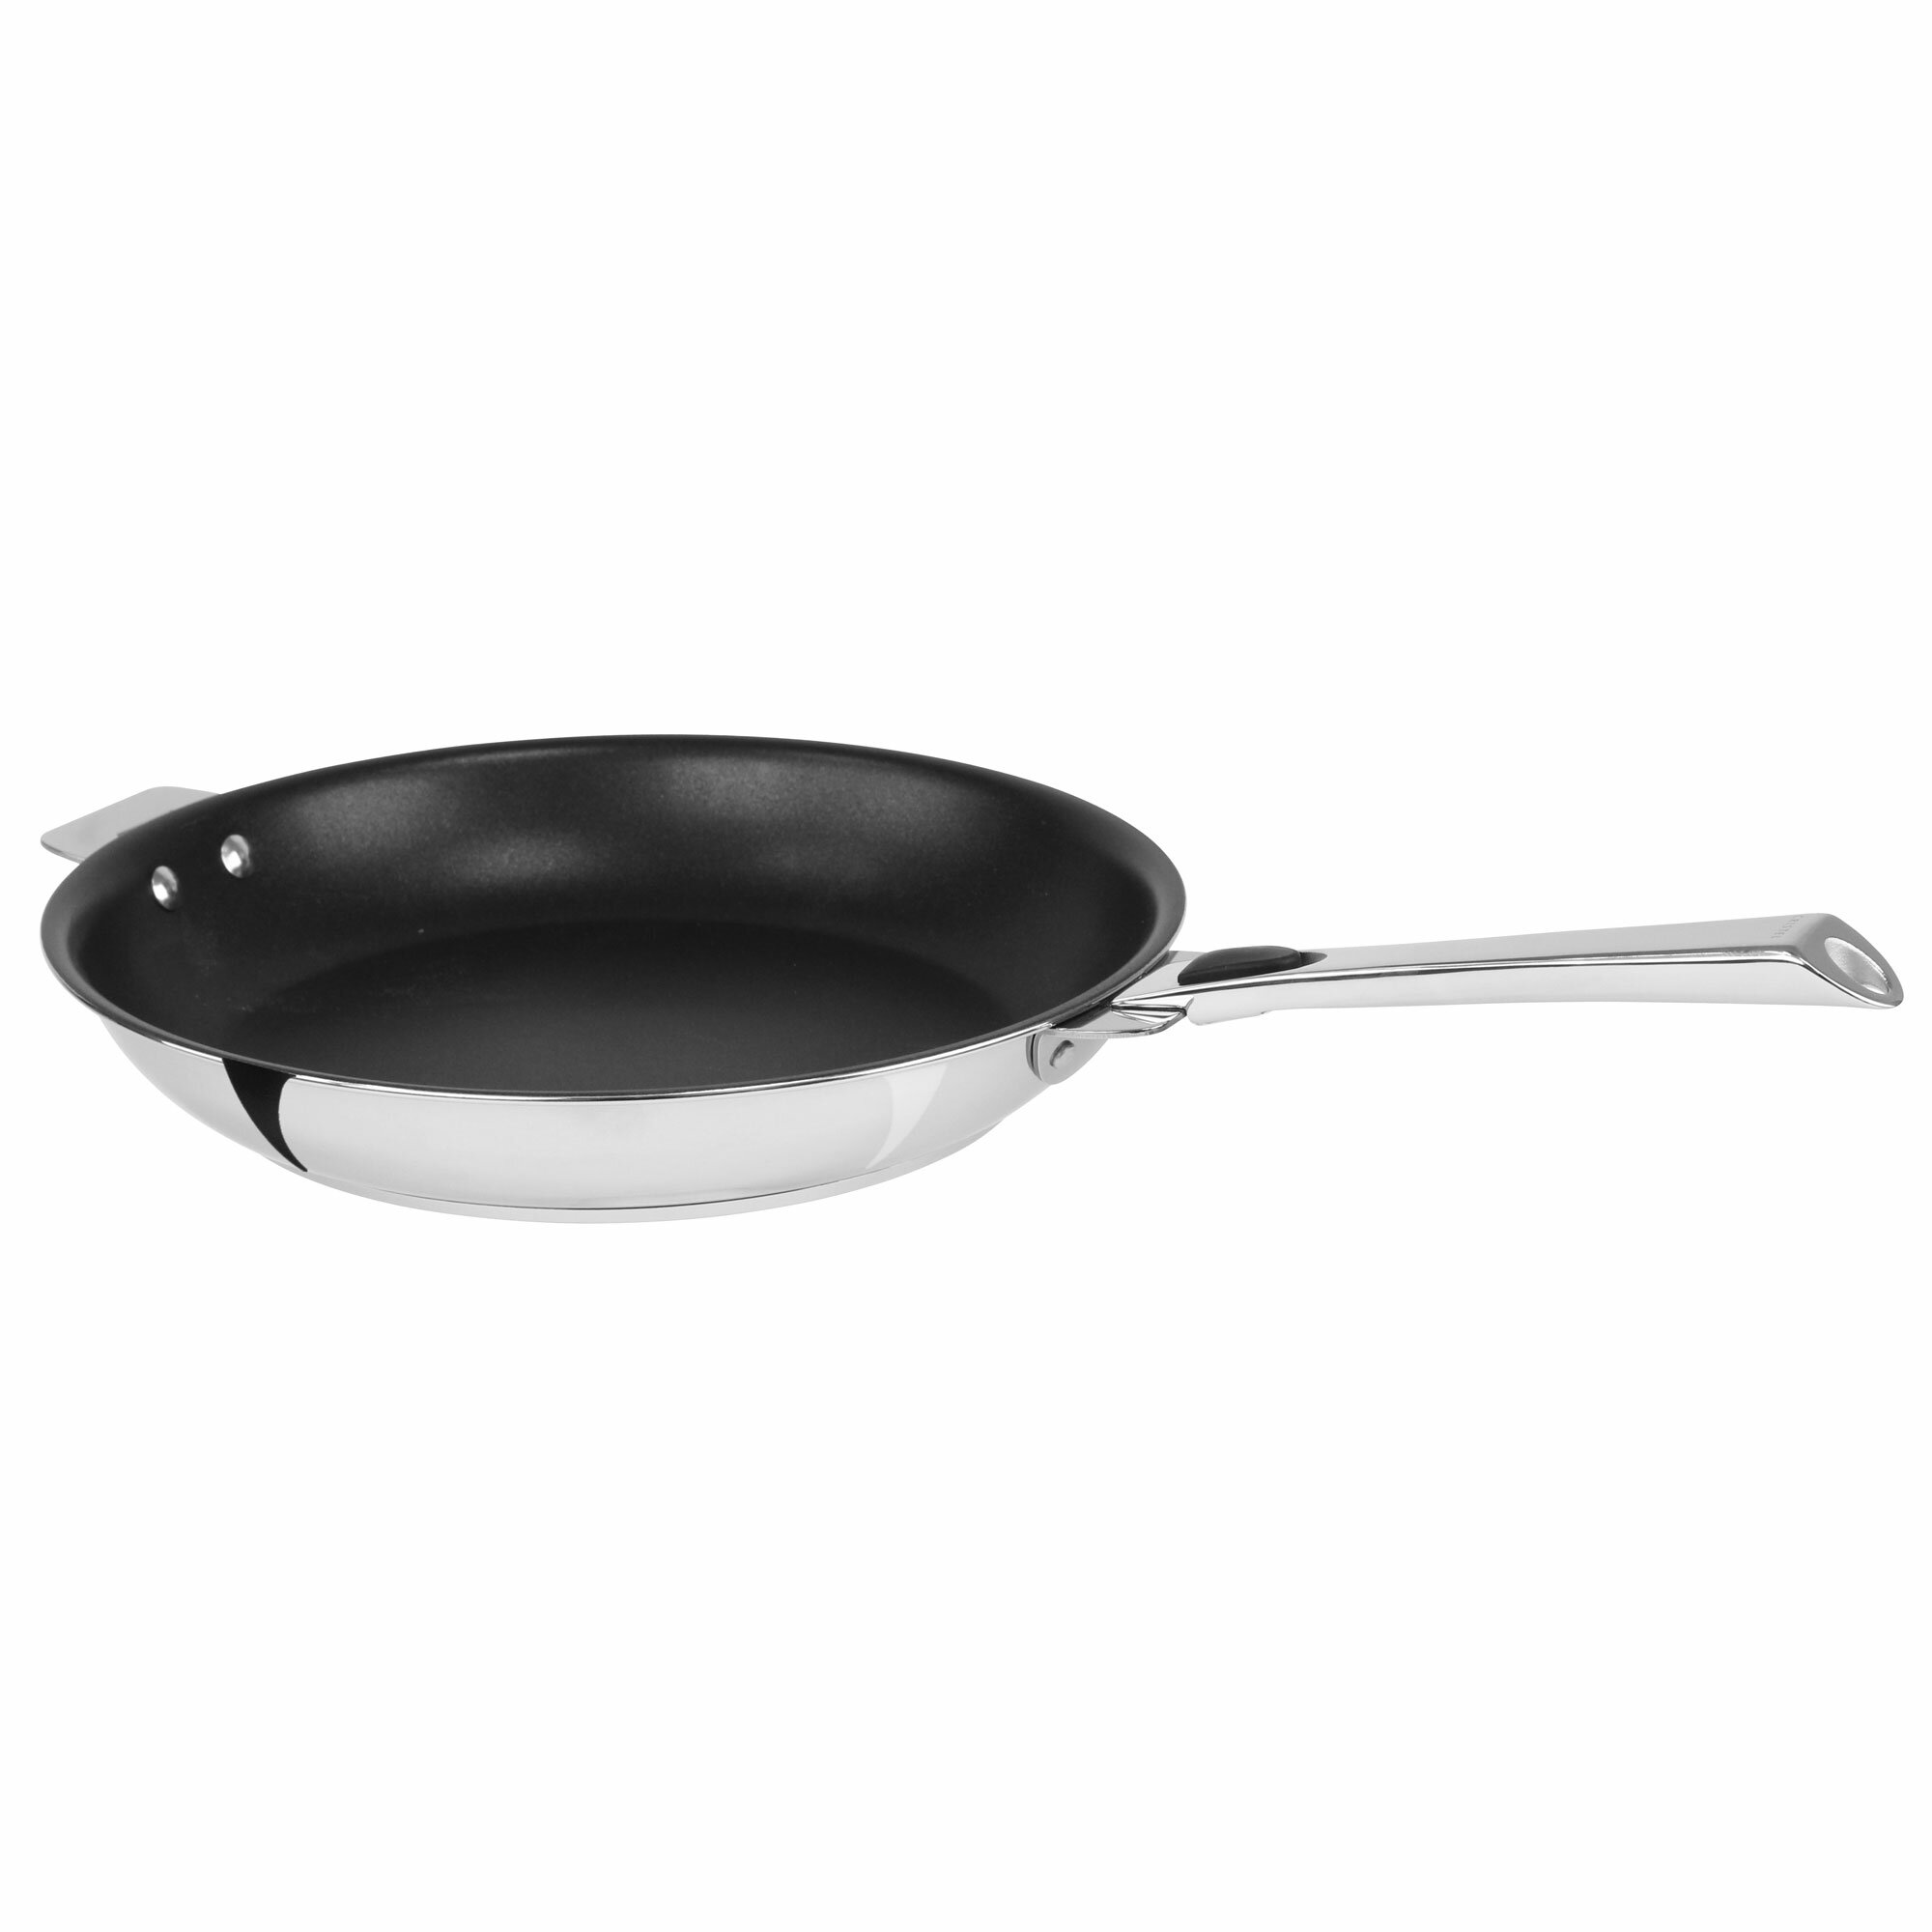 CRISTEL 3-Ply Stainless Steel Saute Pan